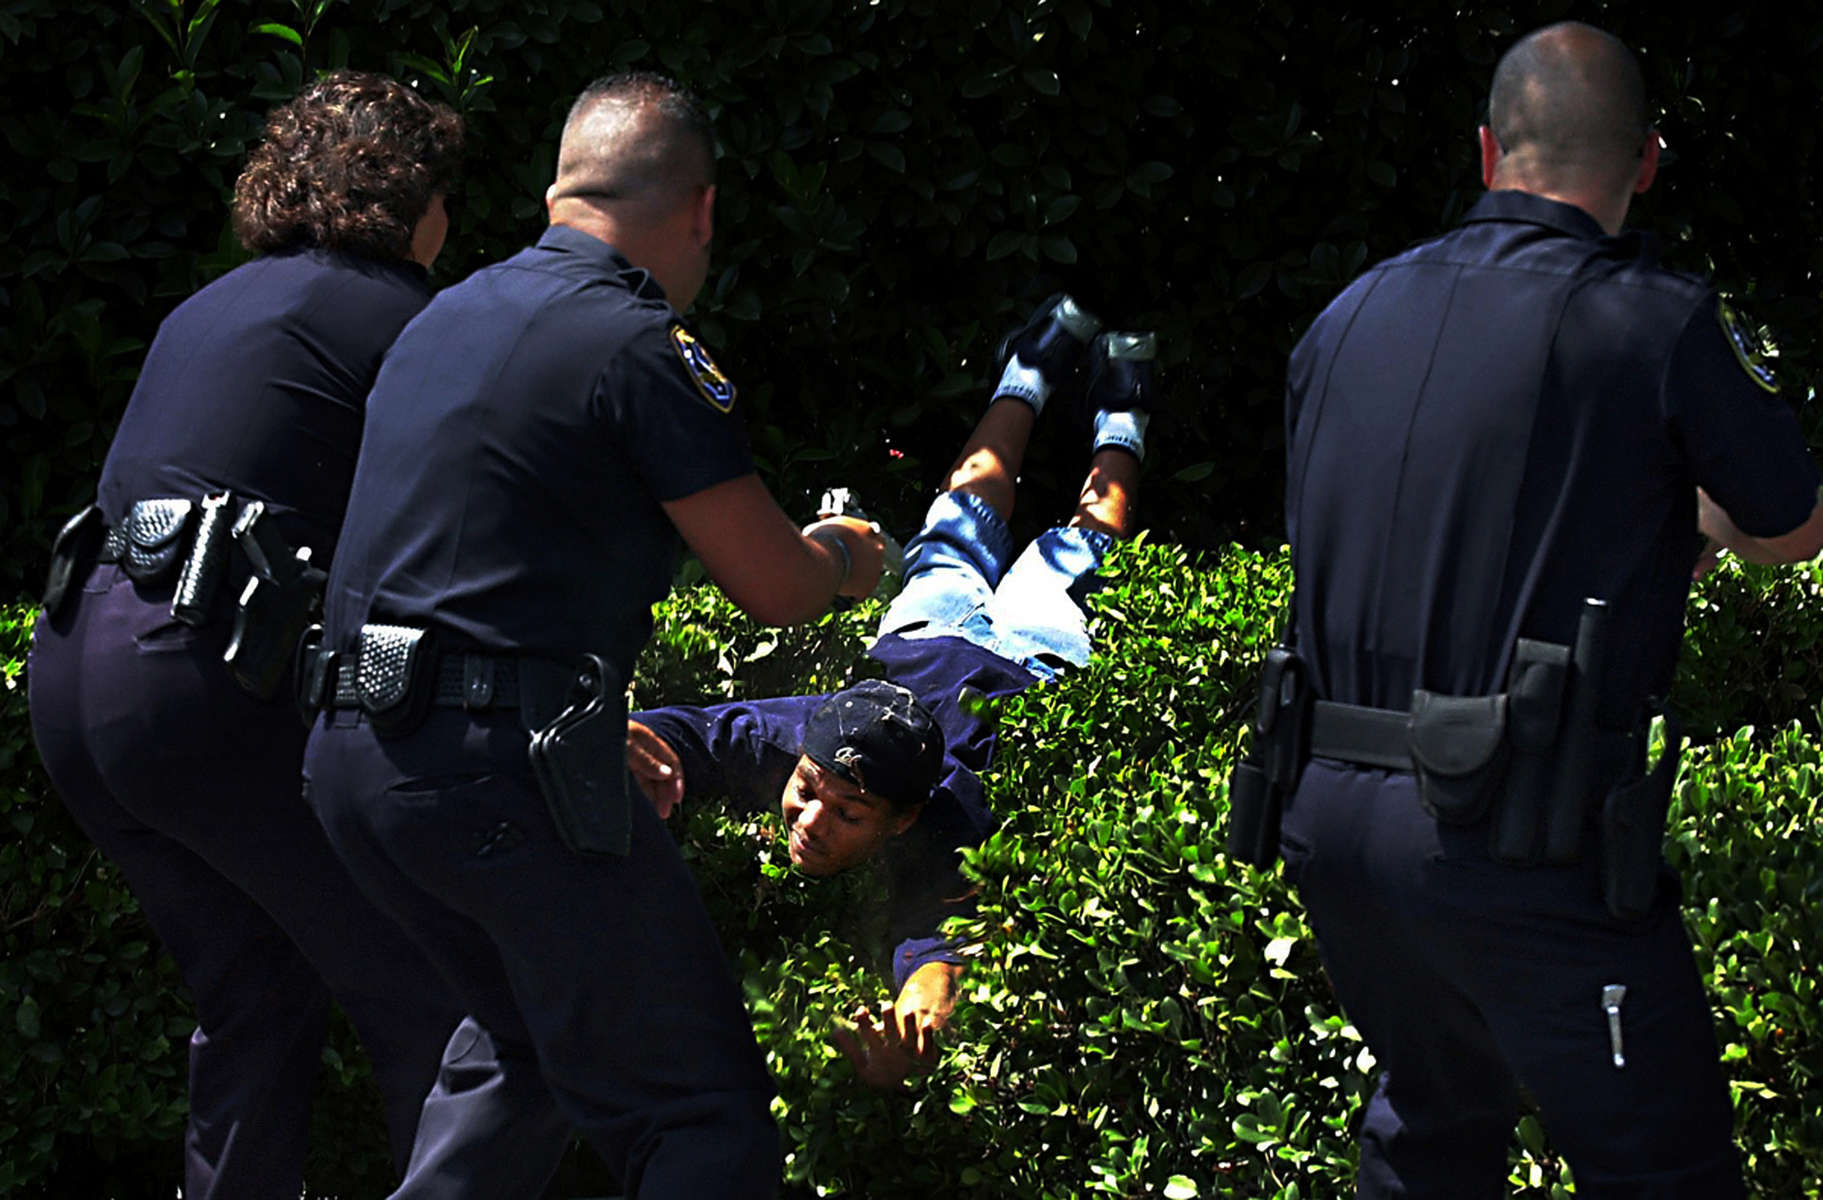 Riverside police officer Debora Foy, left, pulls a burglary suspect over a row of shrubs while taking him into custody on Latham Street in Riverside, Calif. Fellow officers keep theirguns drawn on the suspect. (The Press-Enterprise/ Mark Zaleski)